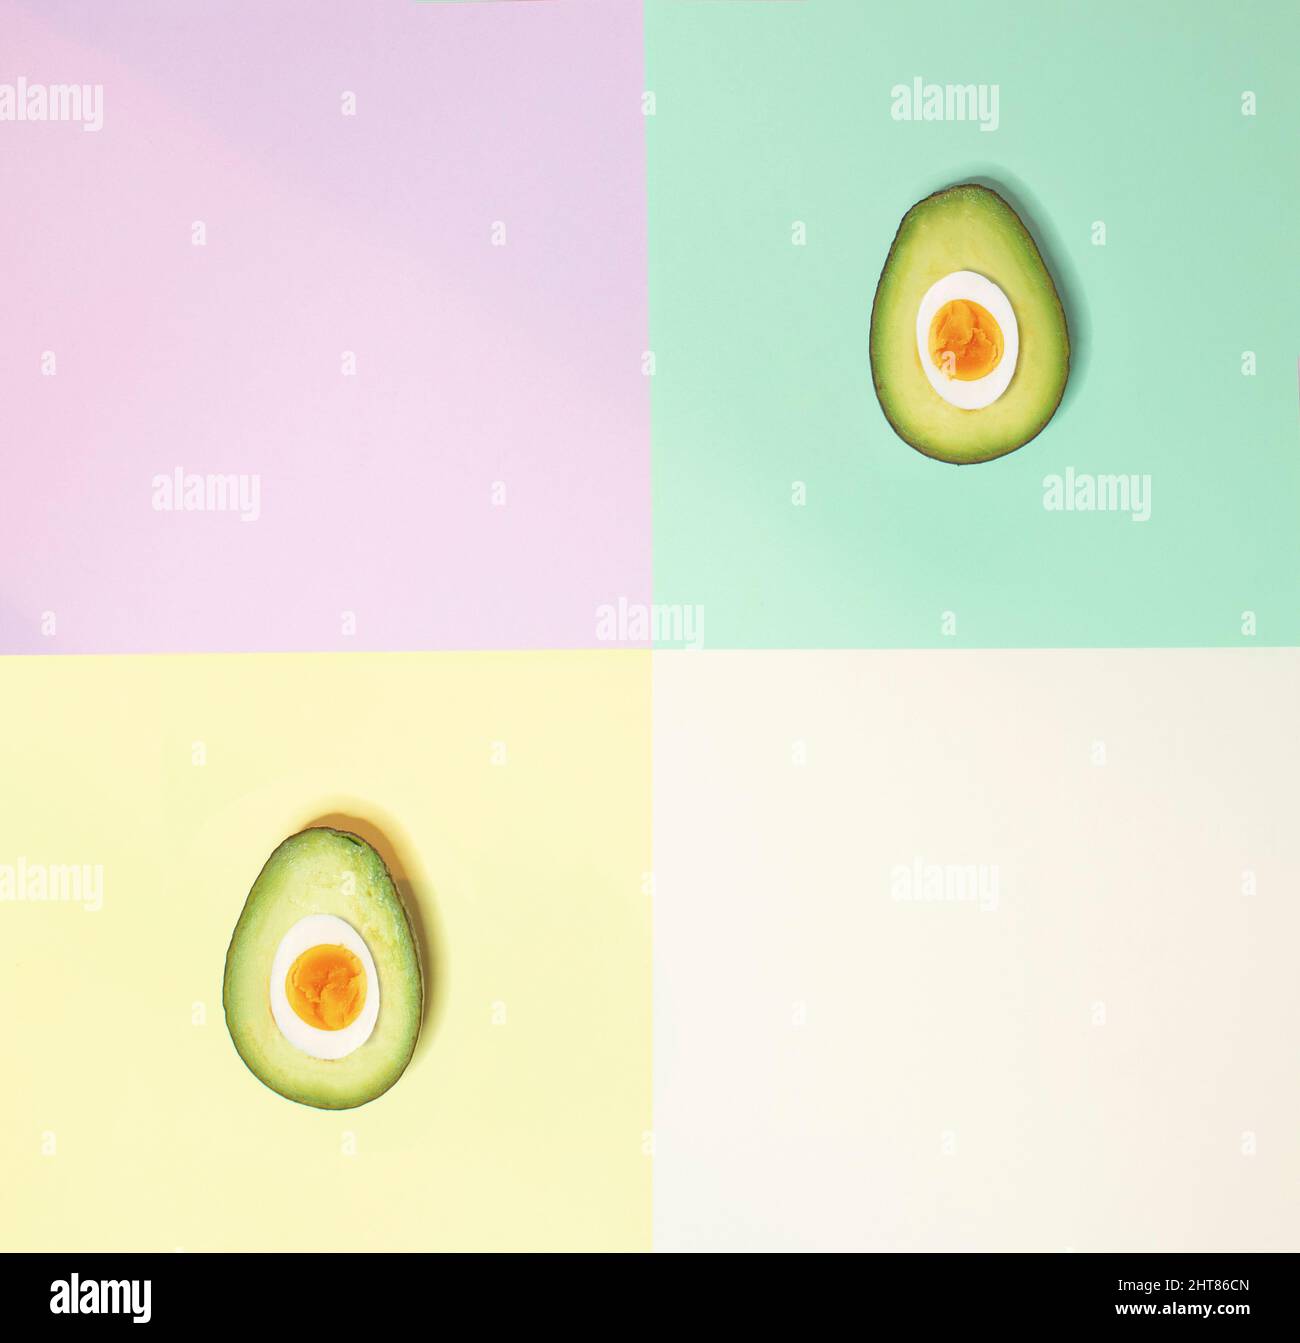 Avocado and egg on pastel colorful background. Creative flat lay. Stock Photo